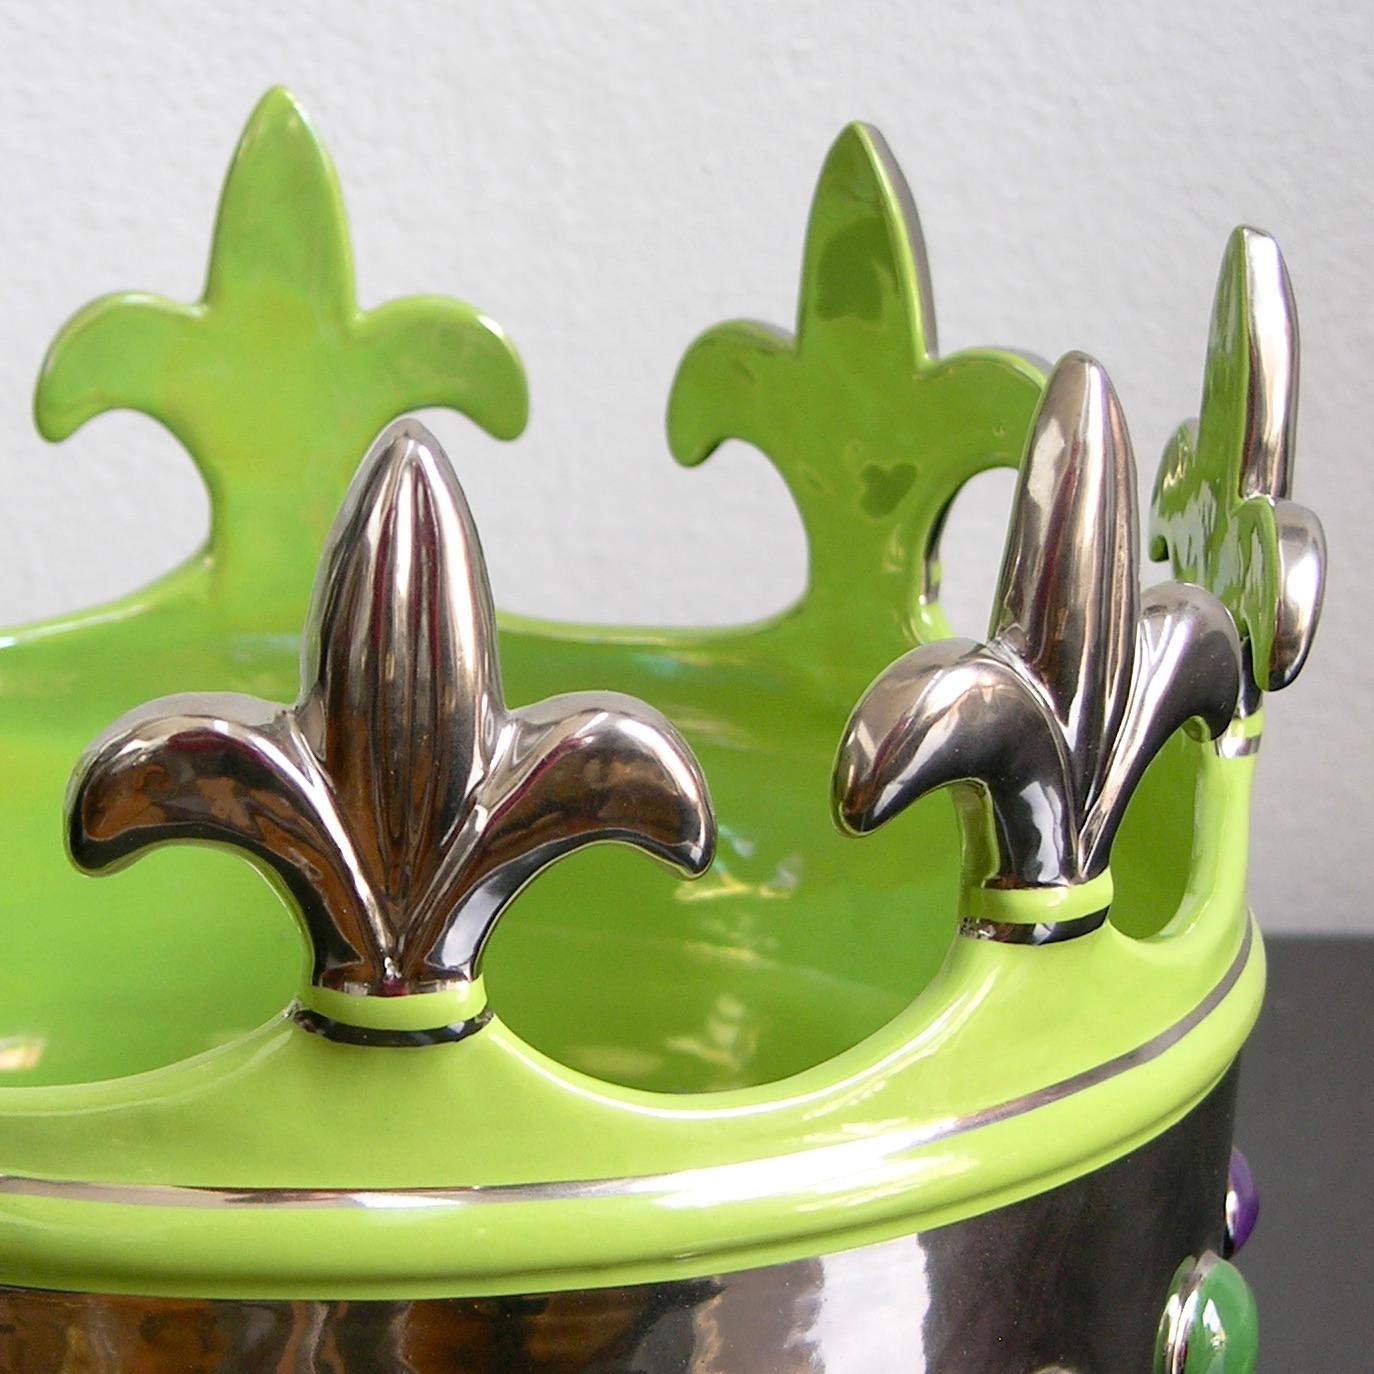 Contemporary handmade Italian post-modern Work of Art in the shape of a Fleur de Lys crown in majolica, exclusive design by Ceramica Gatti, a long tradition studio and famous designer Ettore Sottsass' favorite. Hand enameled in lime green and hand